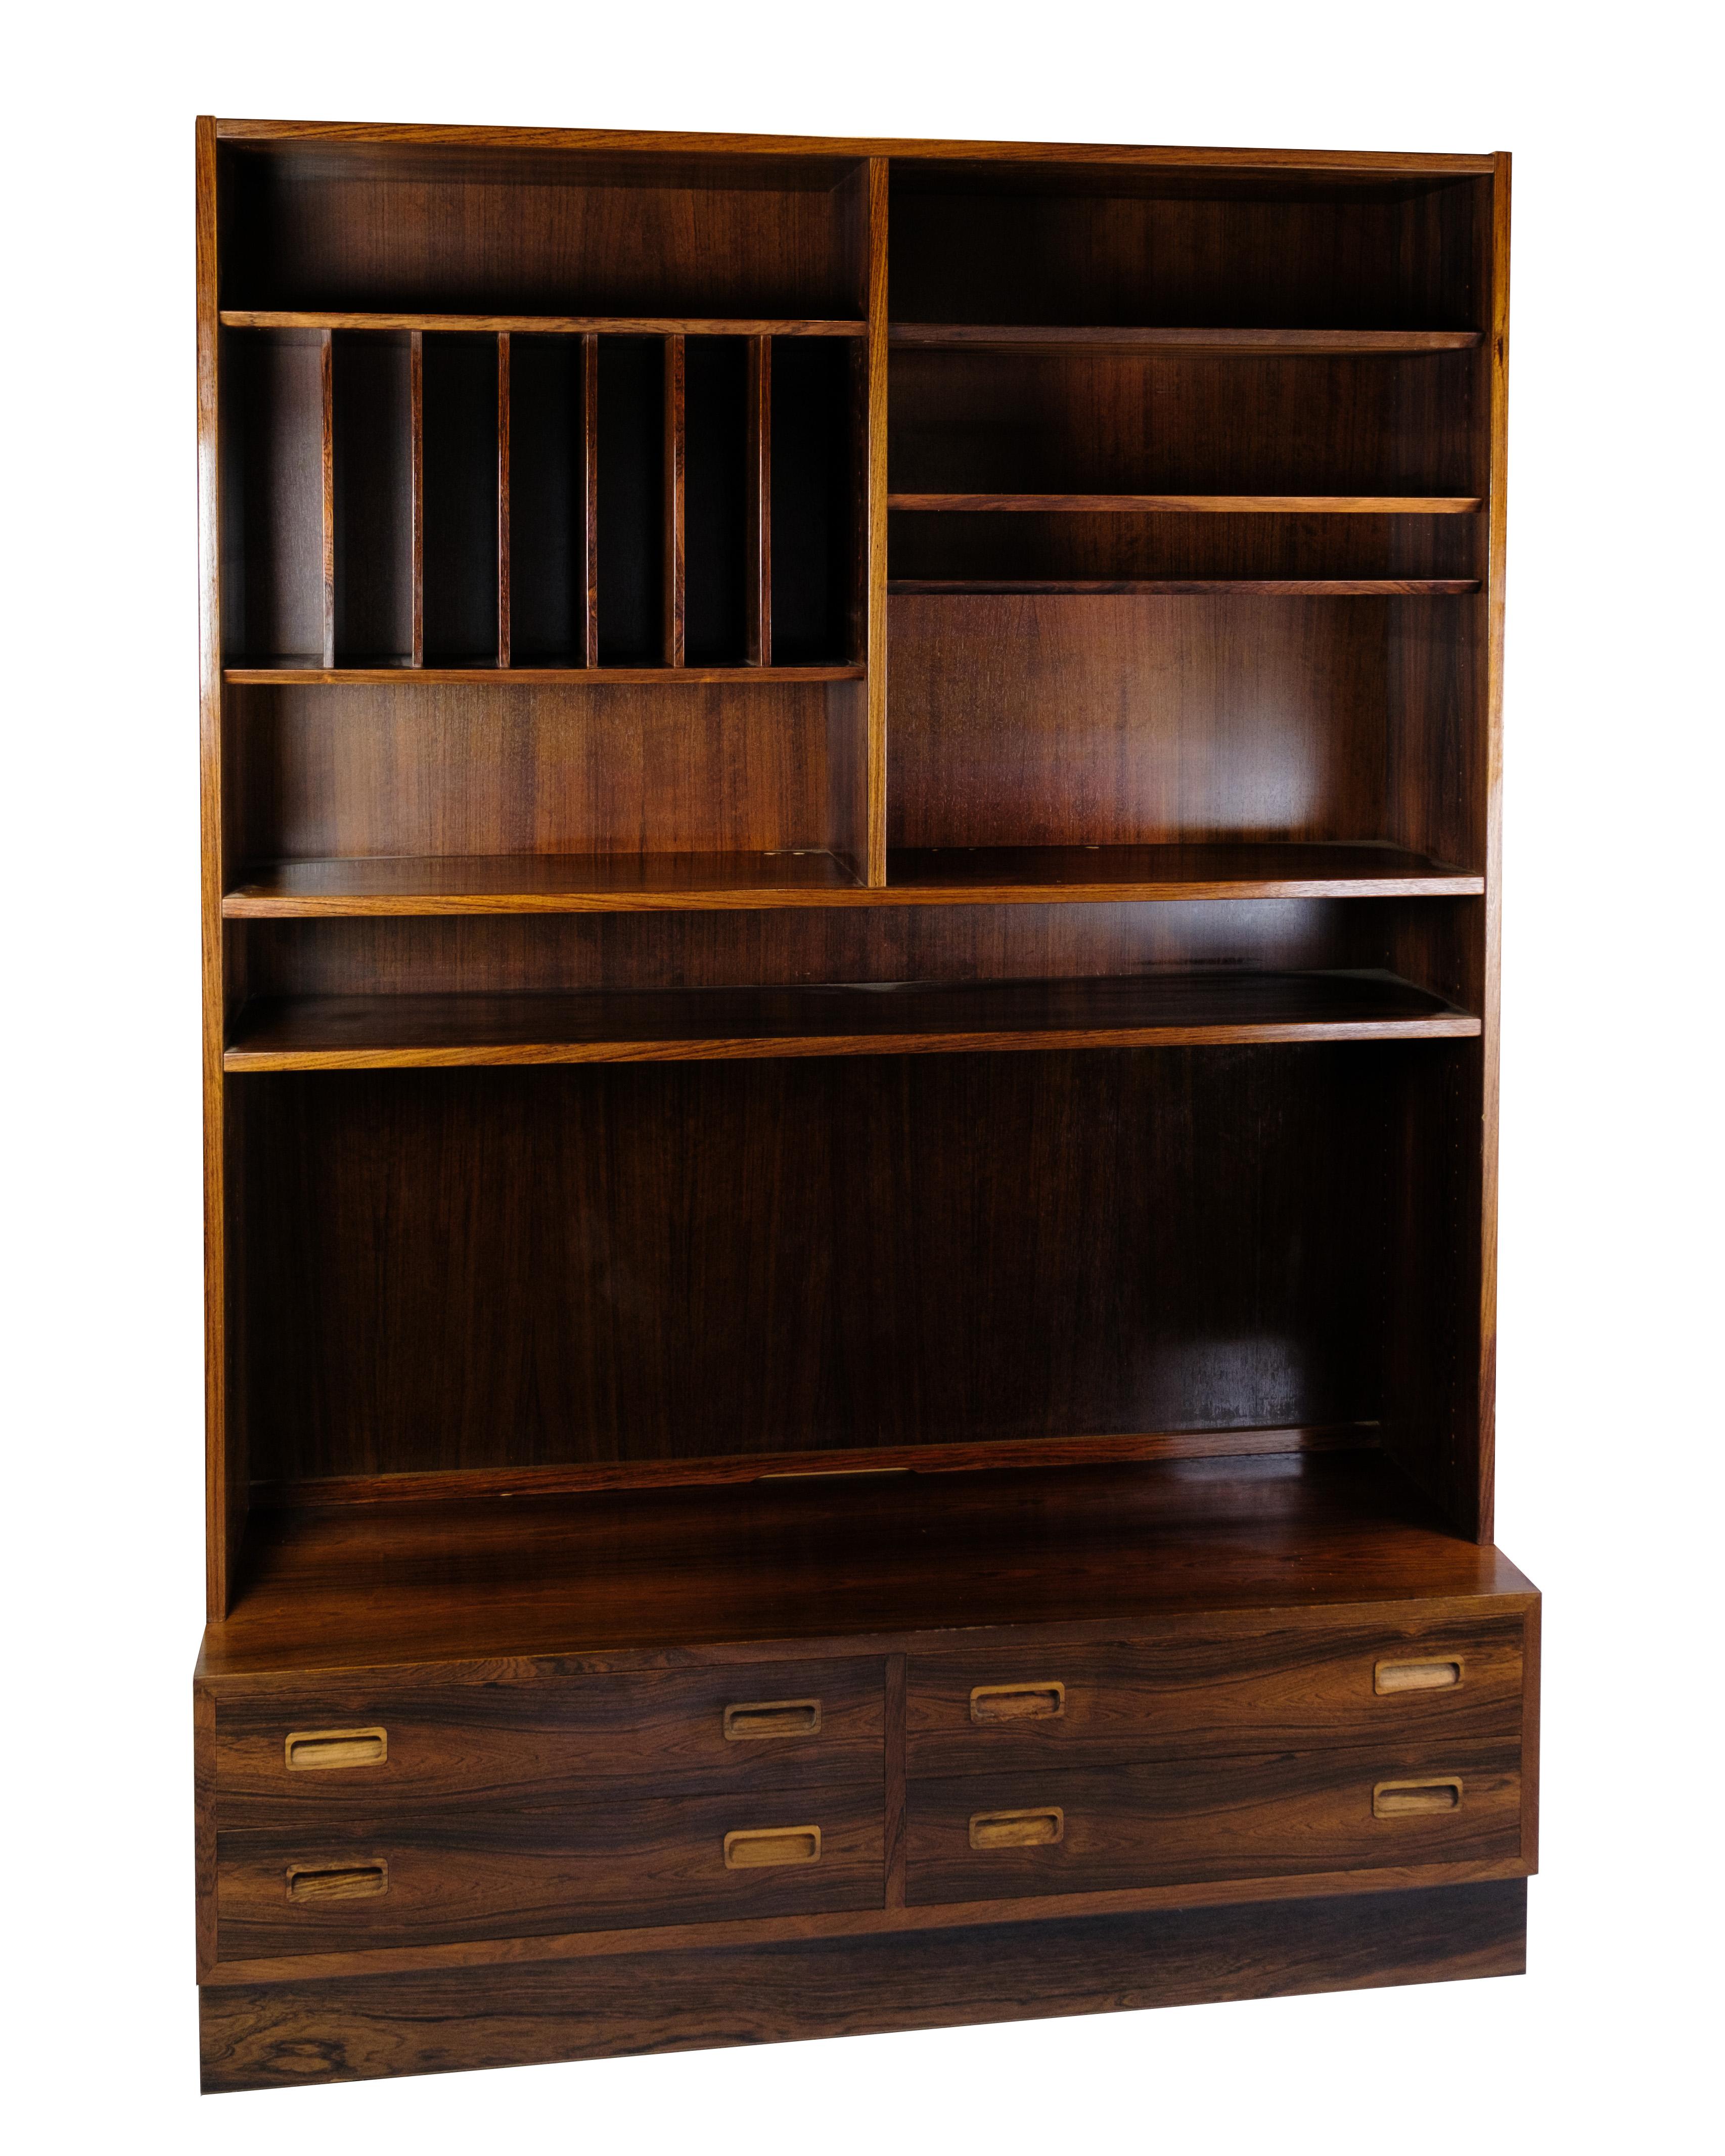 This bookcase is an elegant example of Danish design from the 1960s, produced by Hundevad Møbelfabrik. Crafted from rosewood, this bookcase exudes a timeless beauty and simplicity that fits perfectly with any decor.

Hundevad Møbelfabrik was known